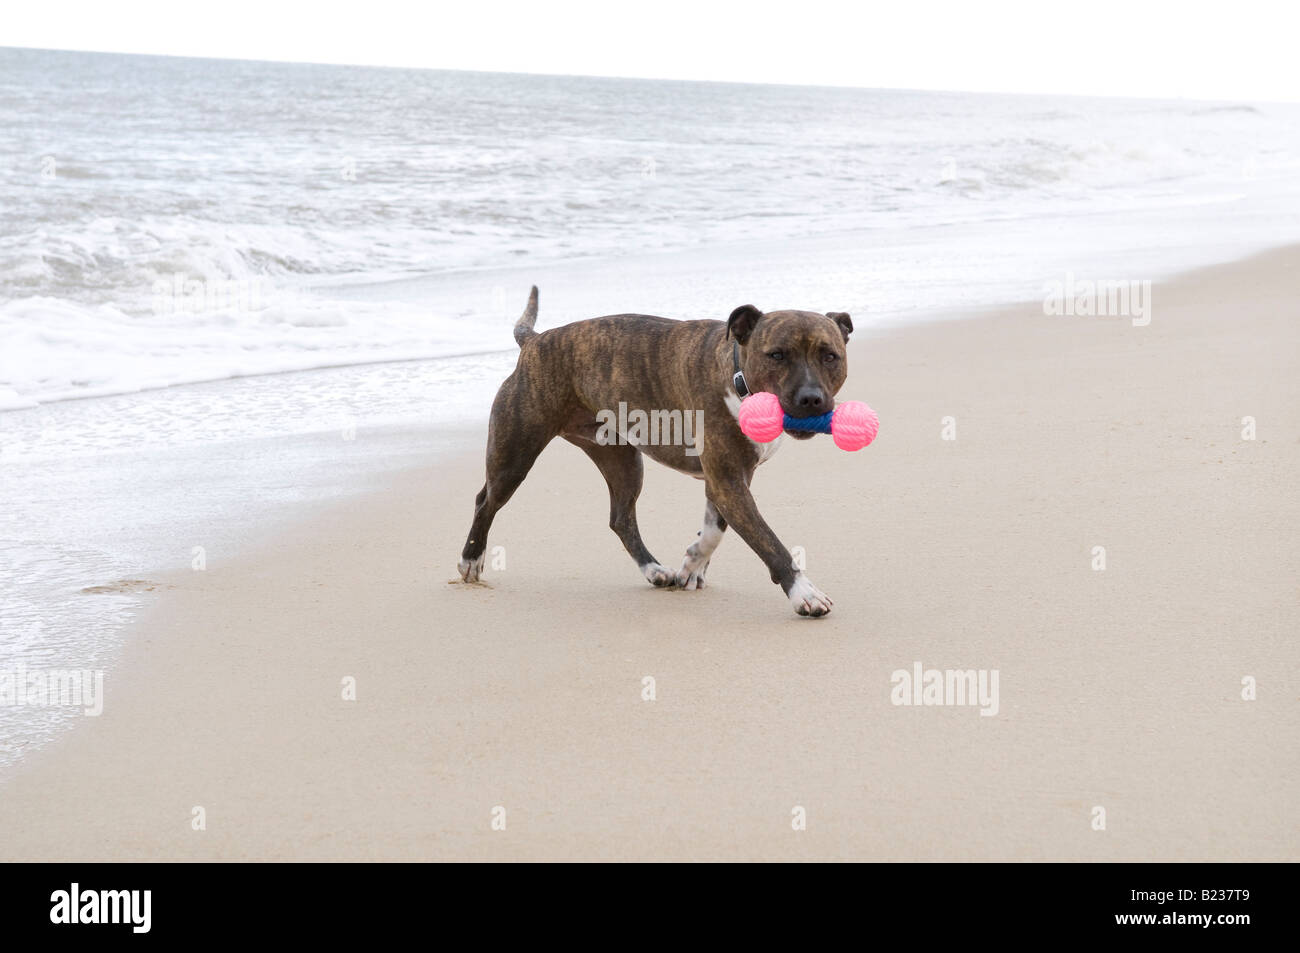 Staffordshire Bull Terrier dog on beach Banque D'Images